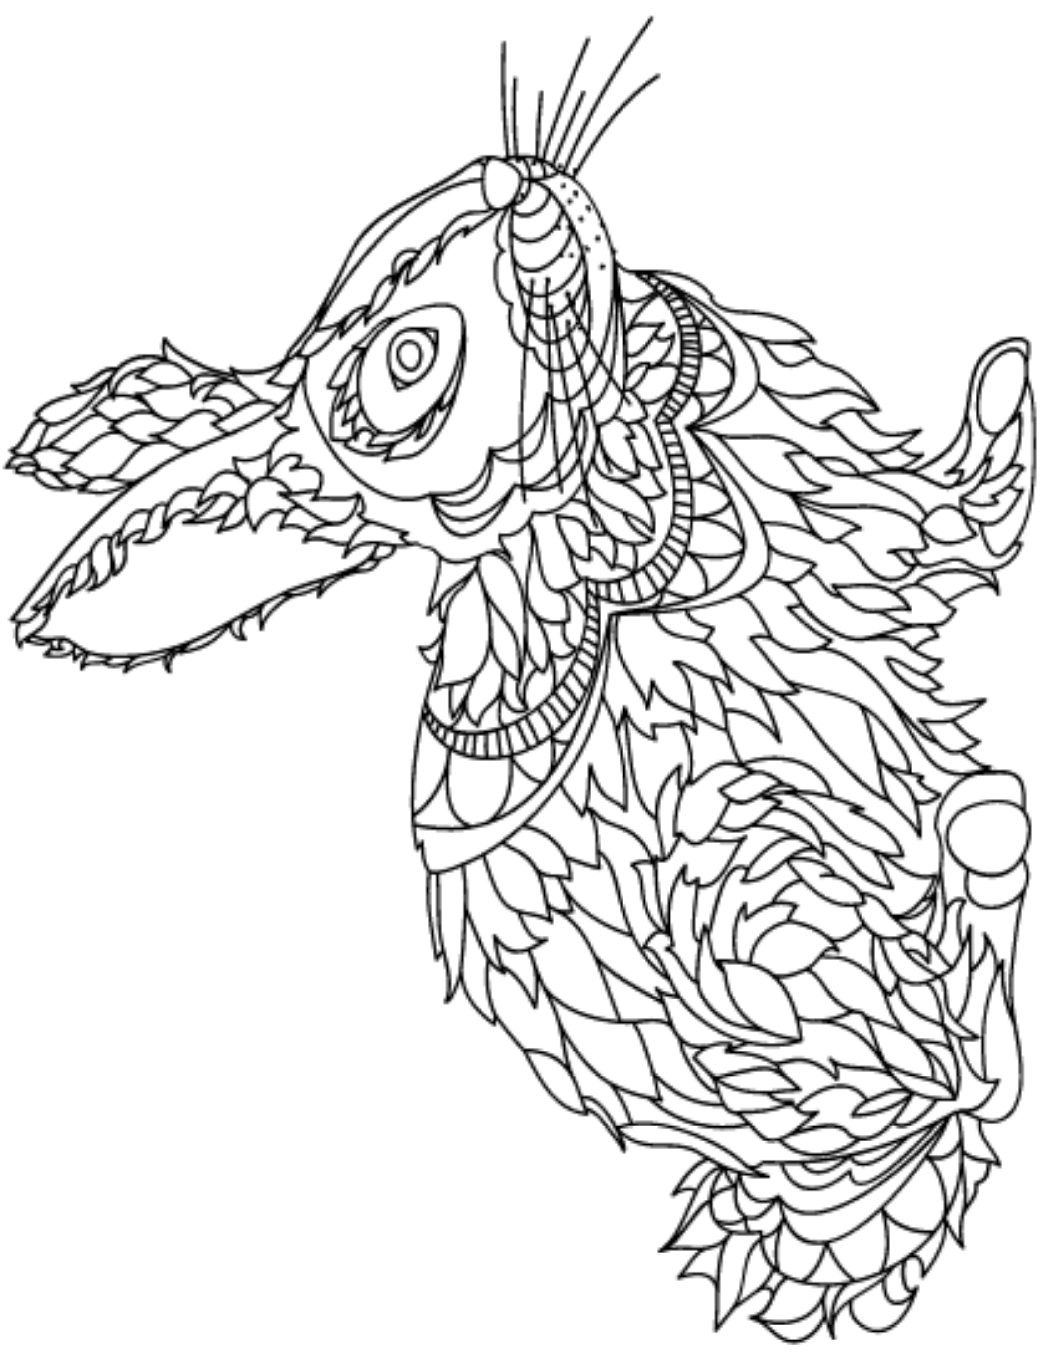 Special Rabbit Coloring Page